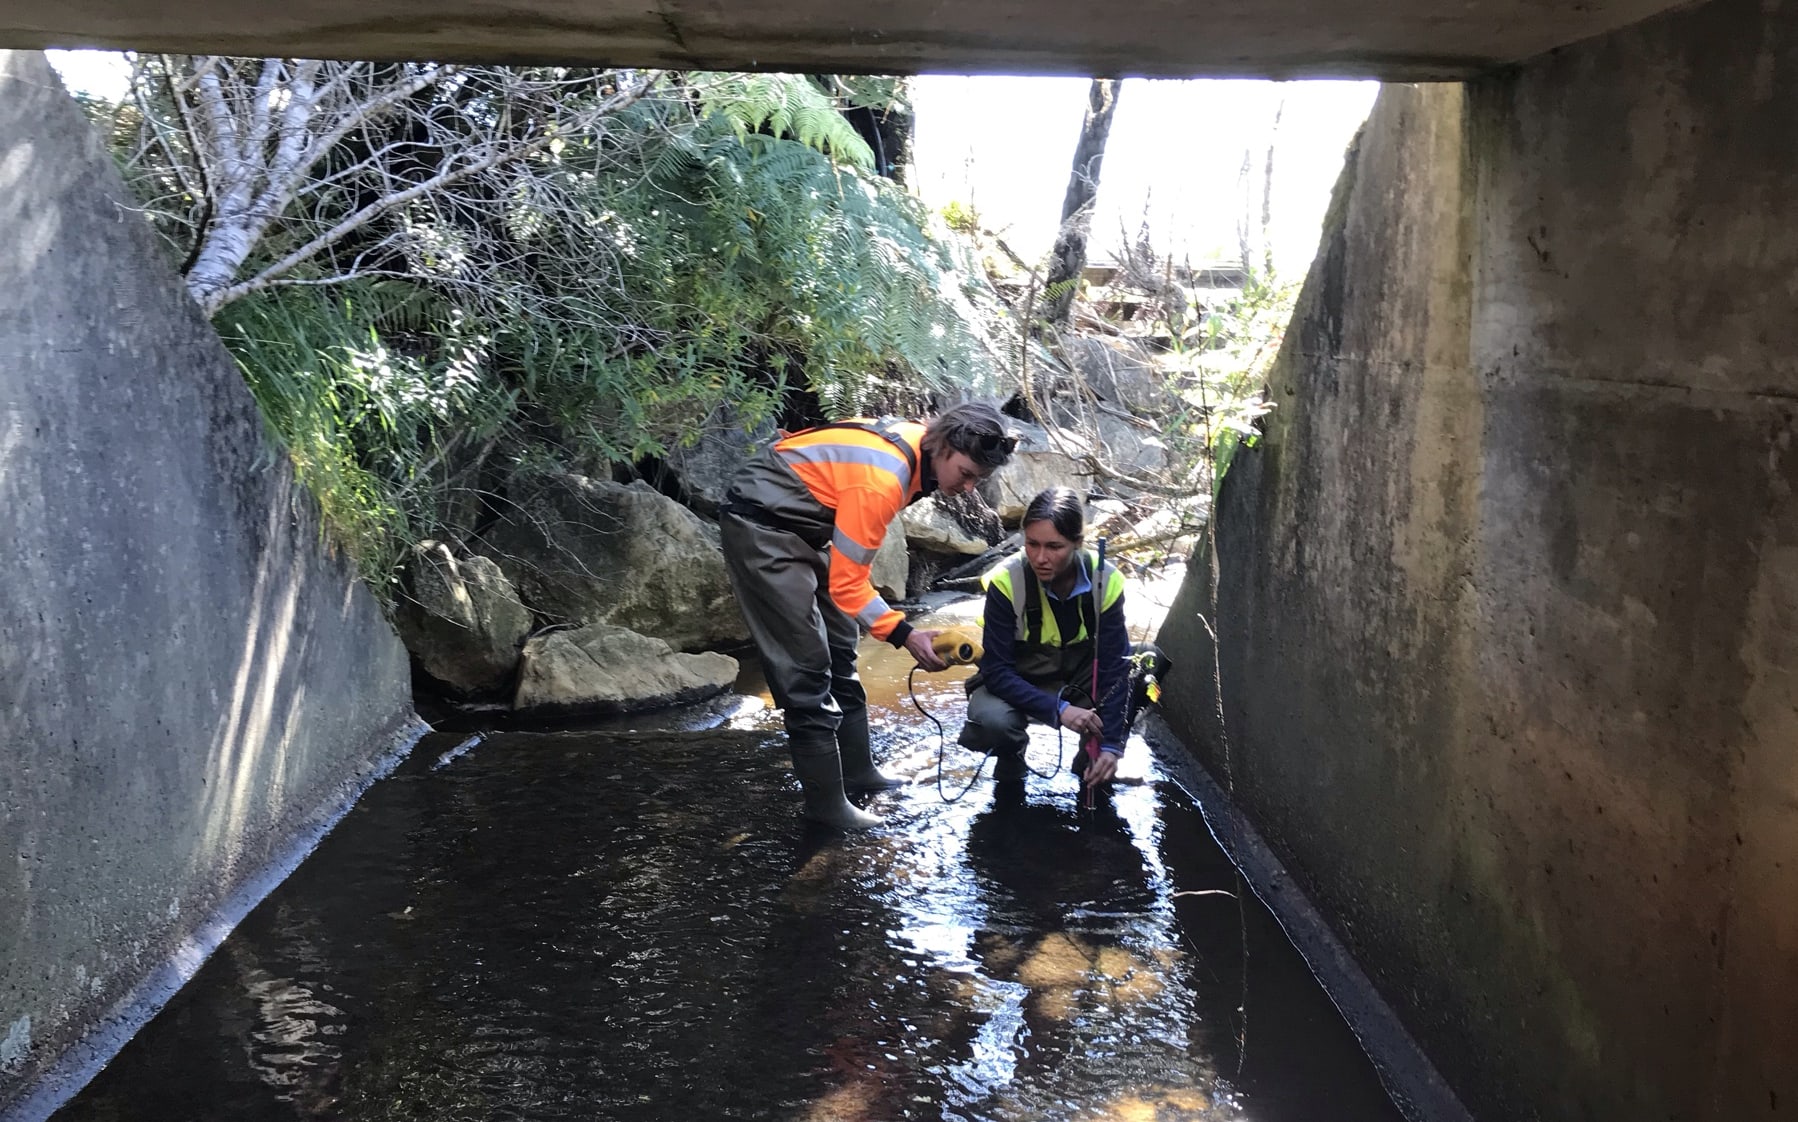 Stephanie Patchett & field assistant Alysha monitor water flow through the culvert. Aysha holds a piece of equipment into the stream flowing through a concrete tunnel while Stephanie holds a guage instrument.